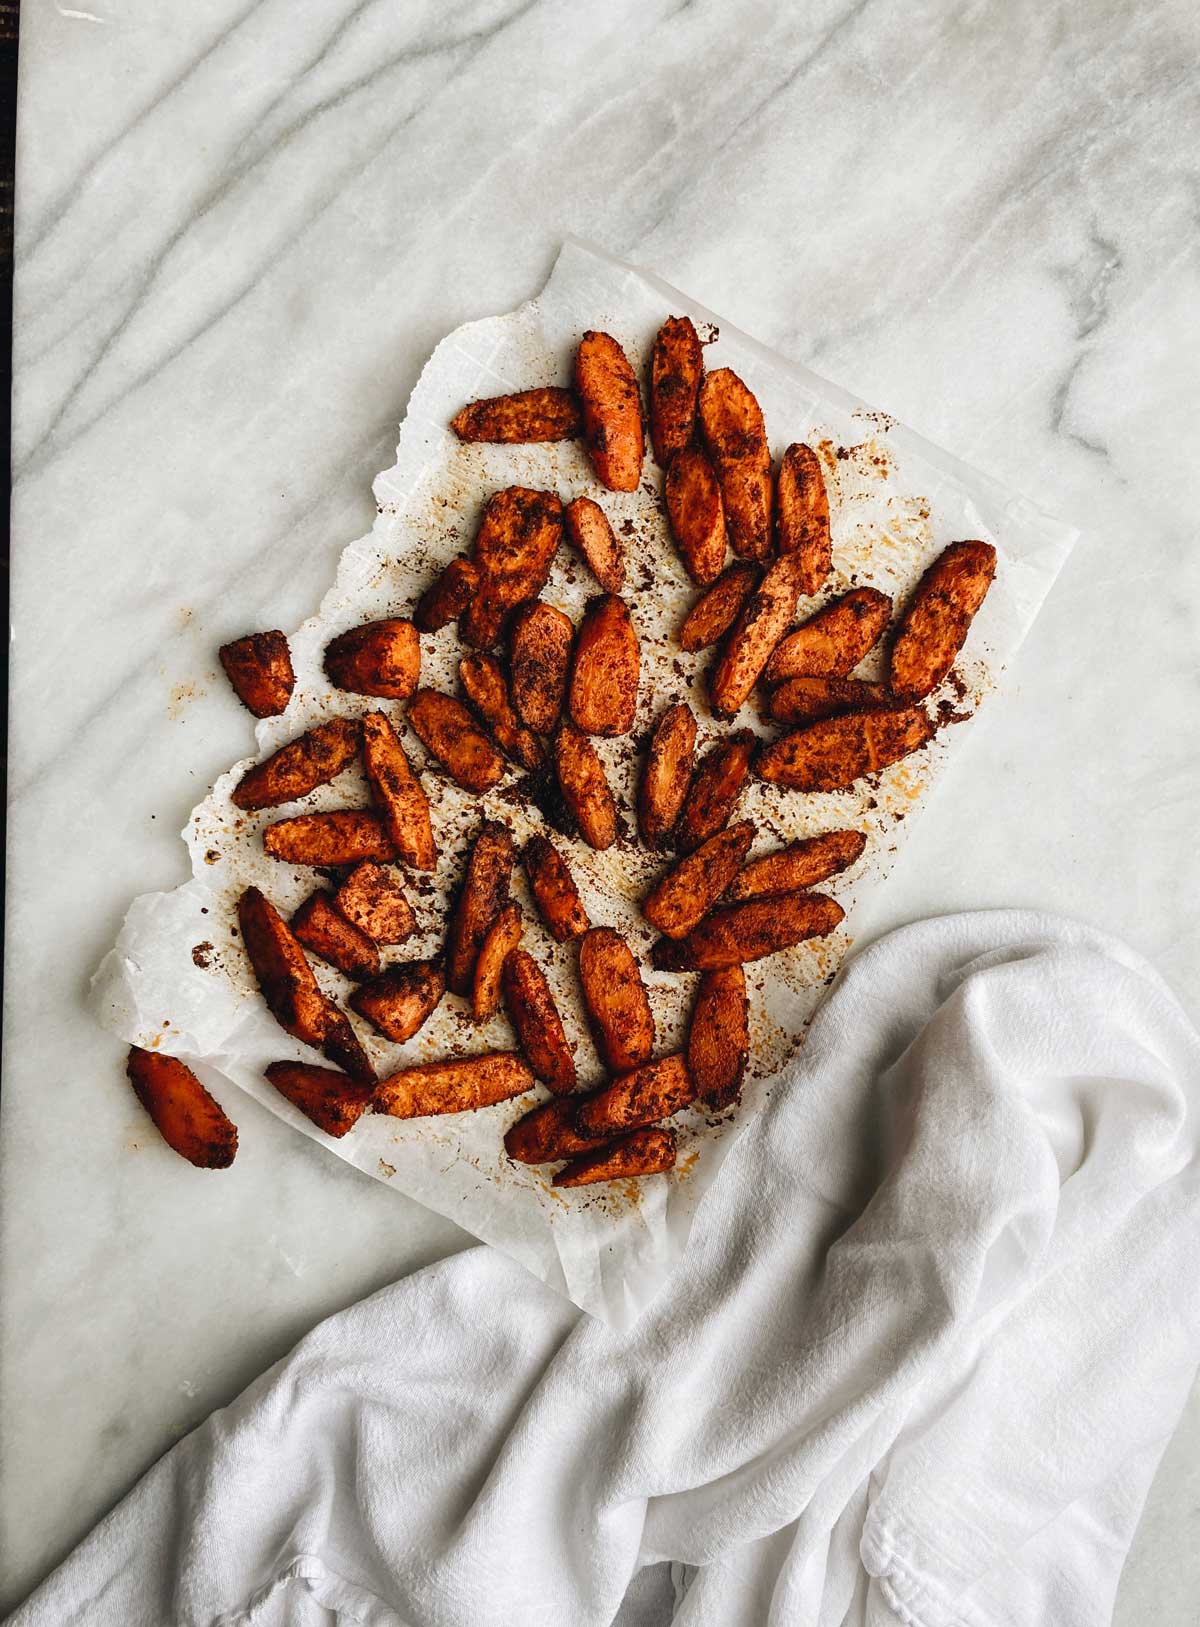 ROASTED SPICED CARROTS